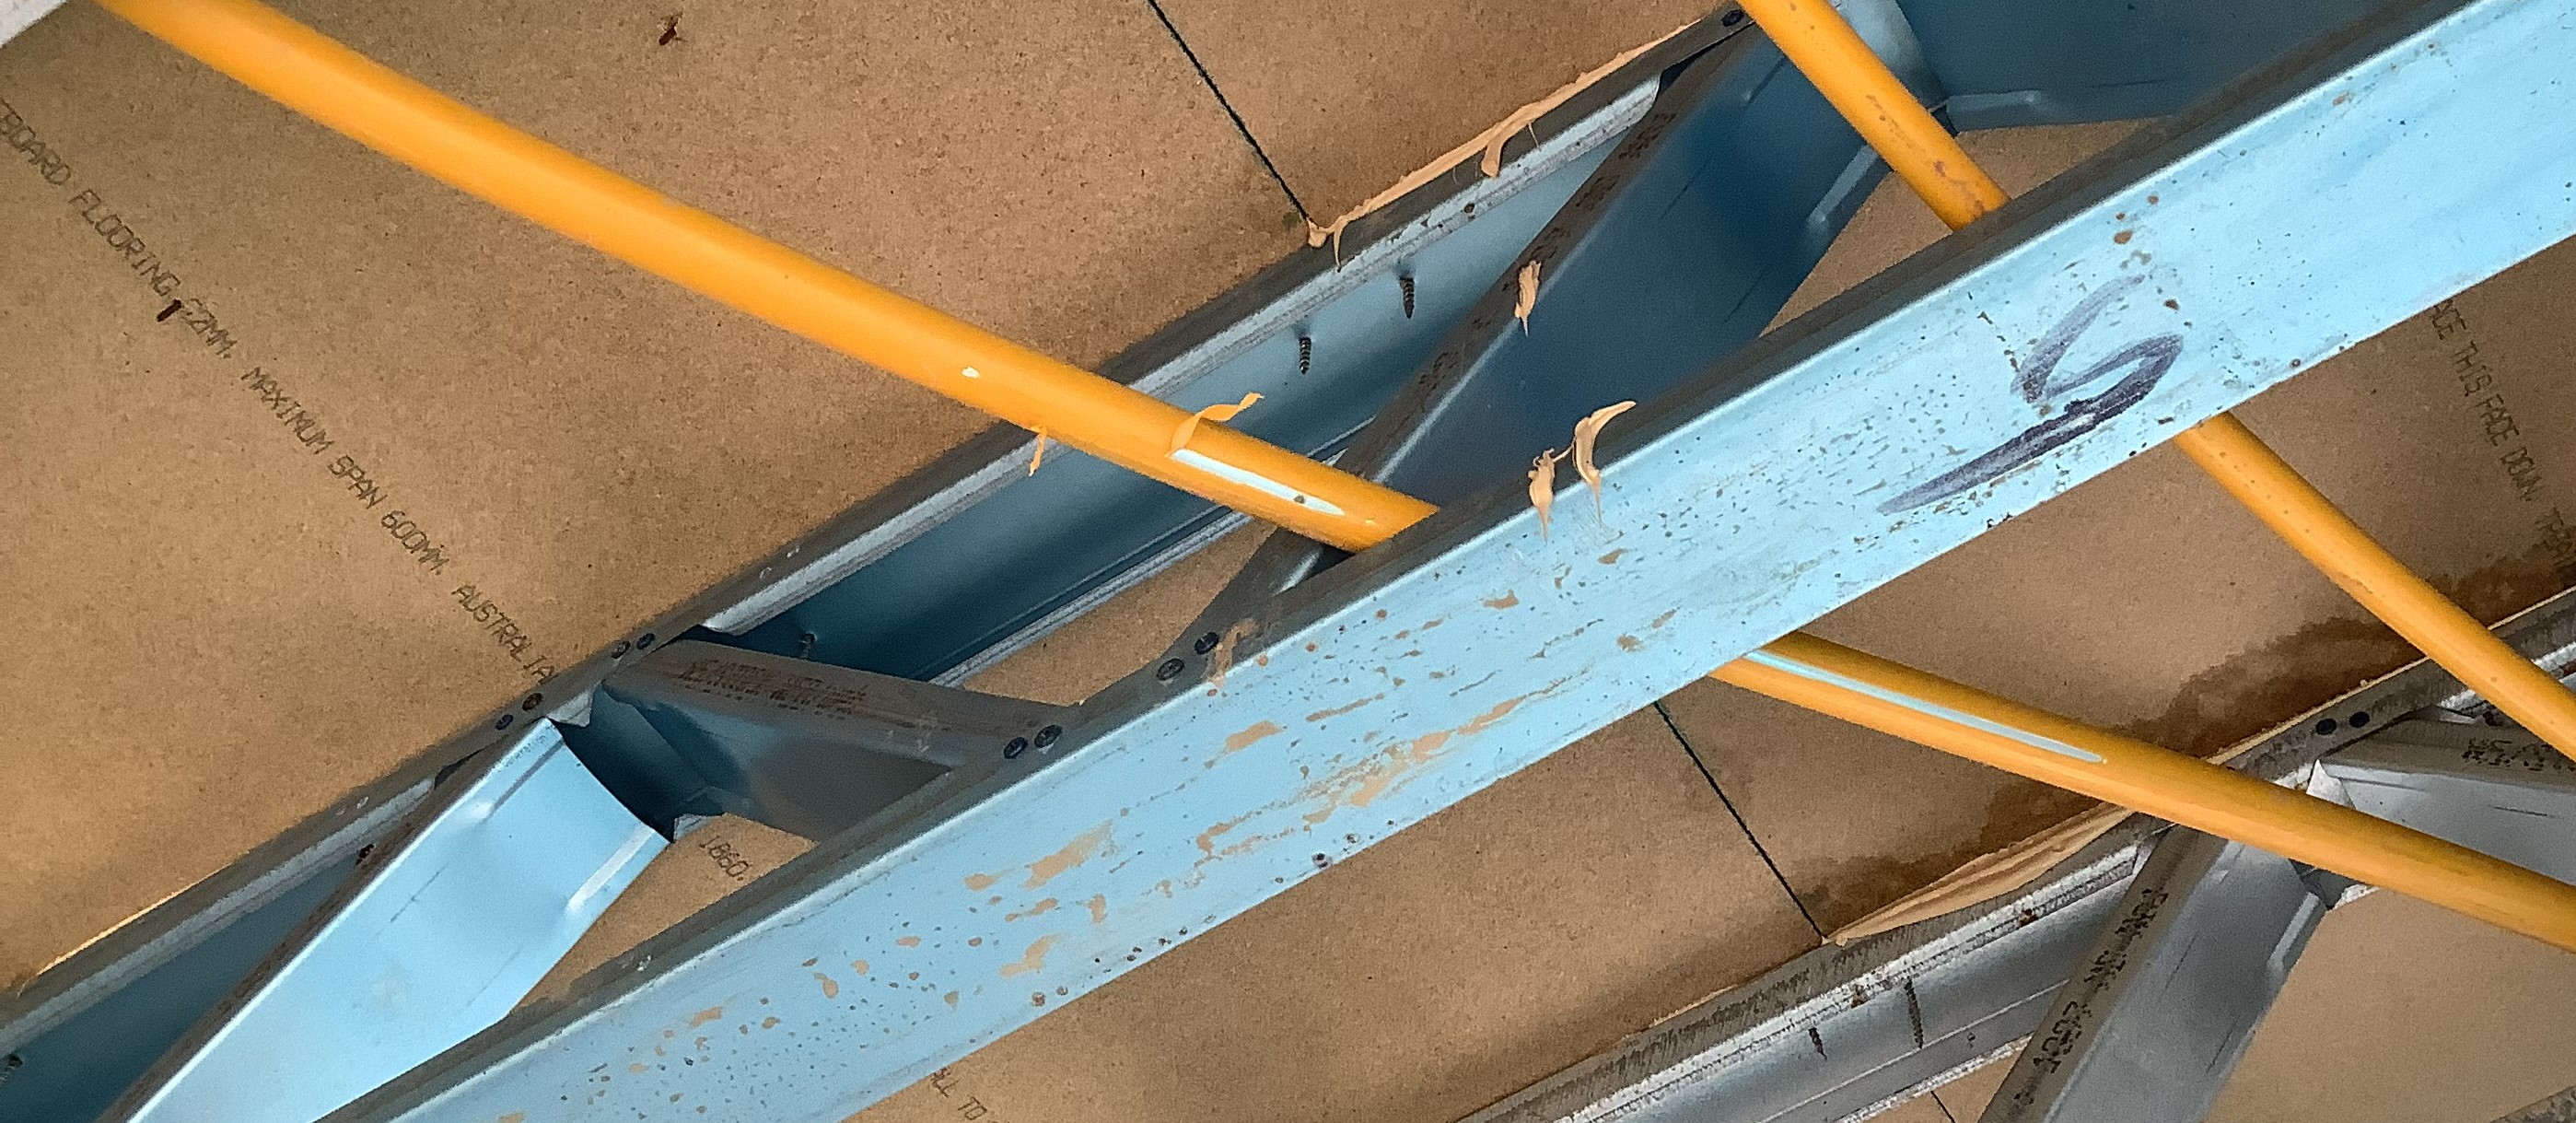 Image example 3: The gas multilayer pipe has been damaged during installation. Insufficient care taken when dragging the pipe past the metal joists.